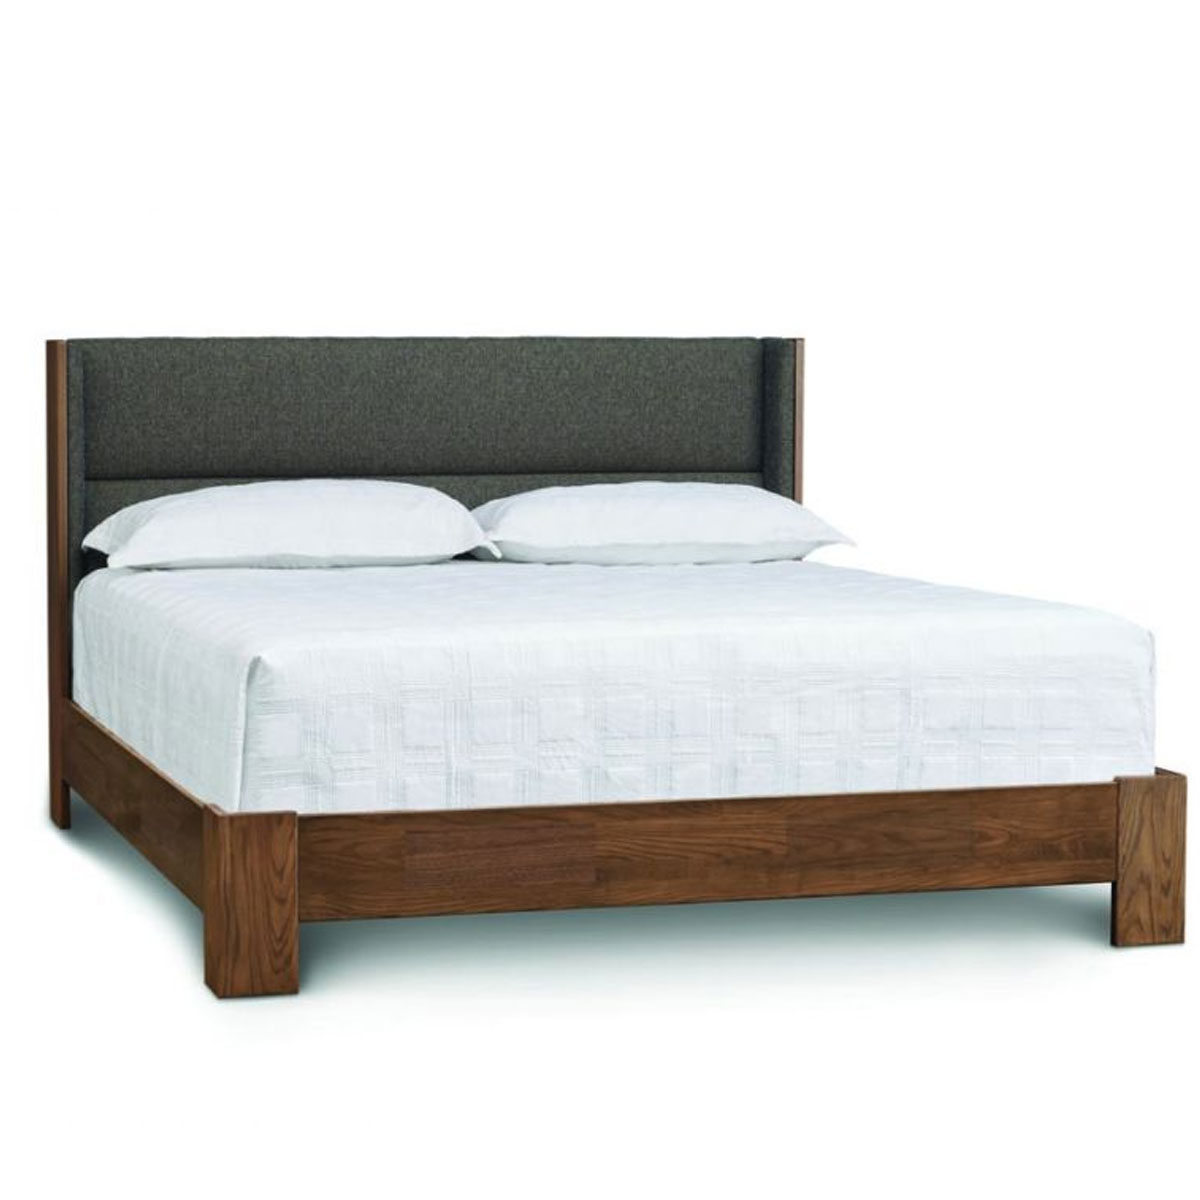 Copeland Sloane Bed with Legs for Mattress Only In Walnut